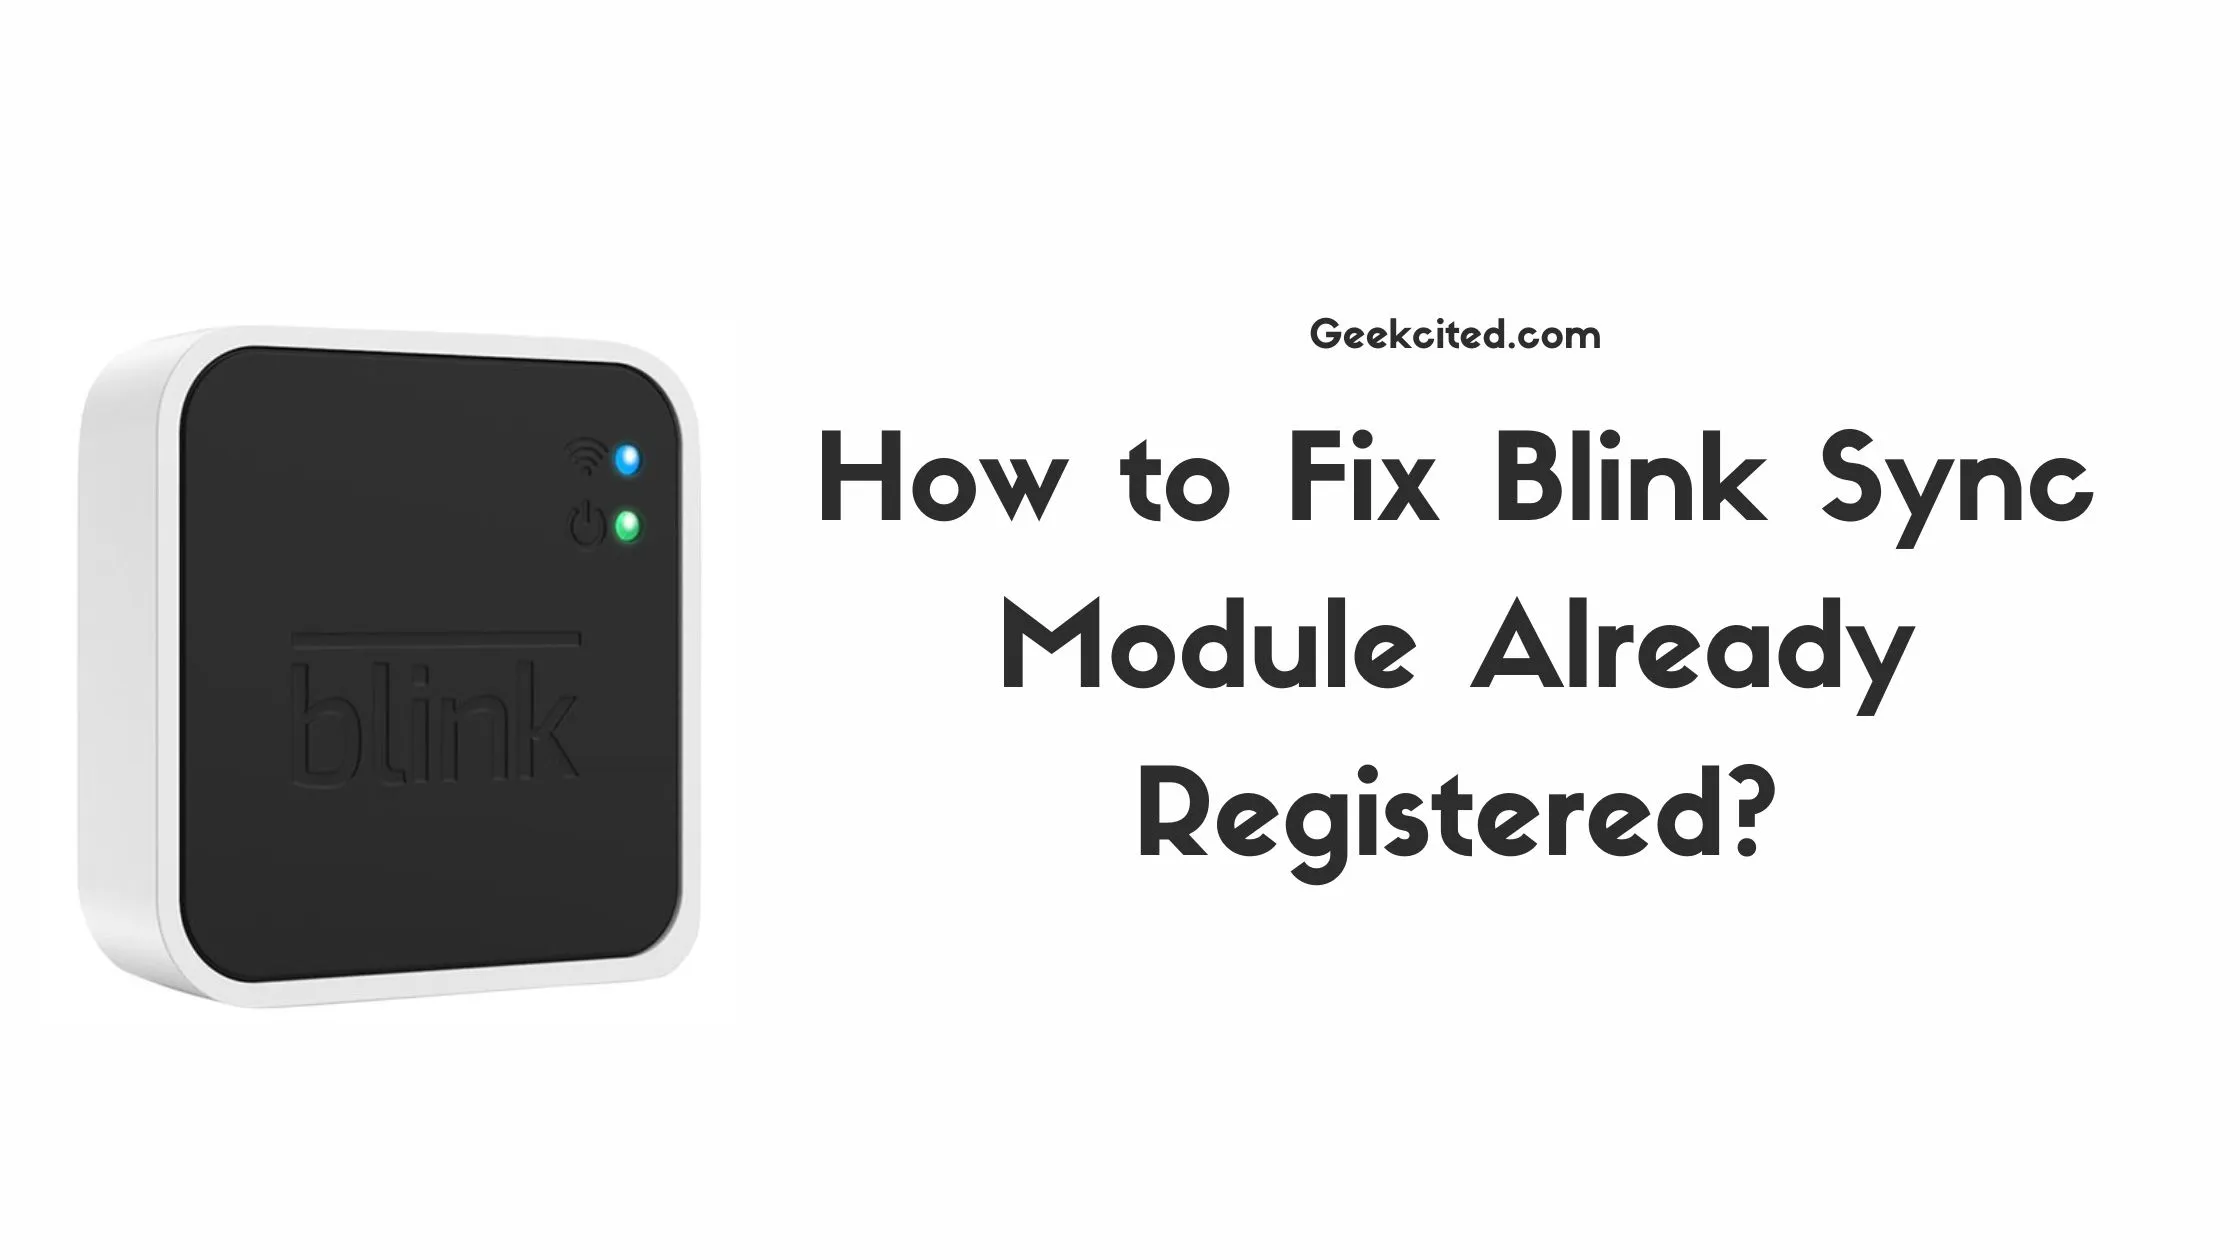 How to Fix Blink Sync Module Already Registered